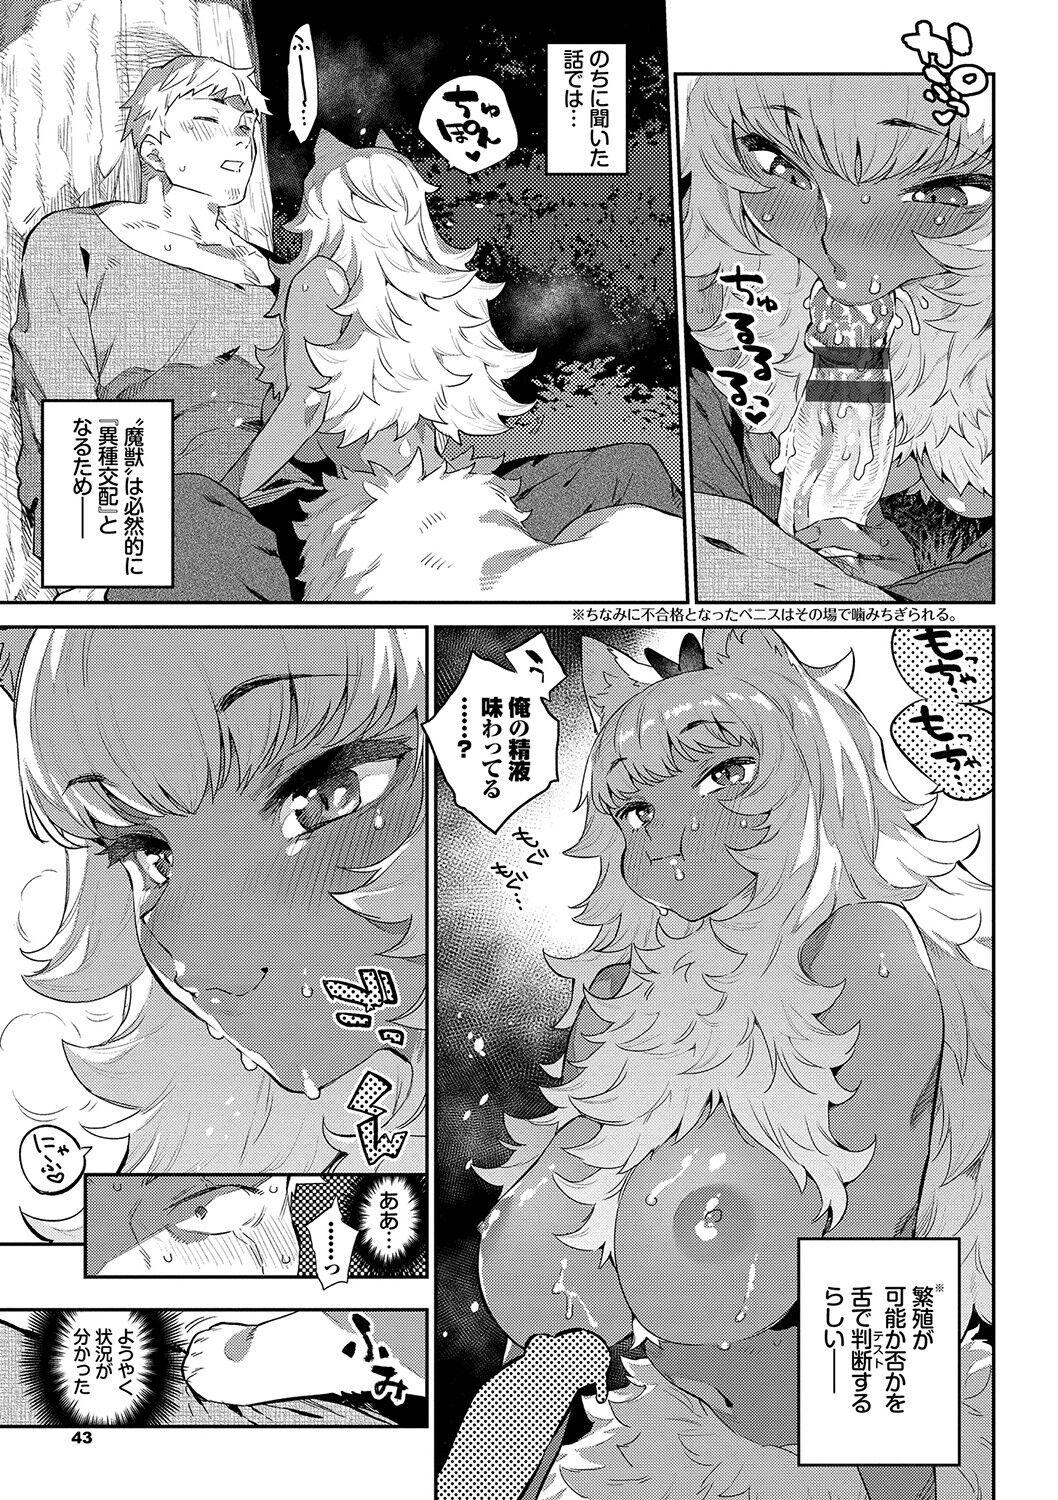 Ihou no Otome - Monster Girls in Another World 43